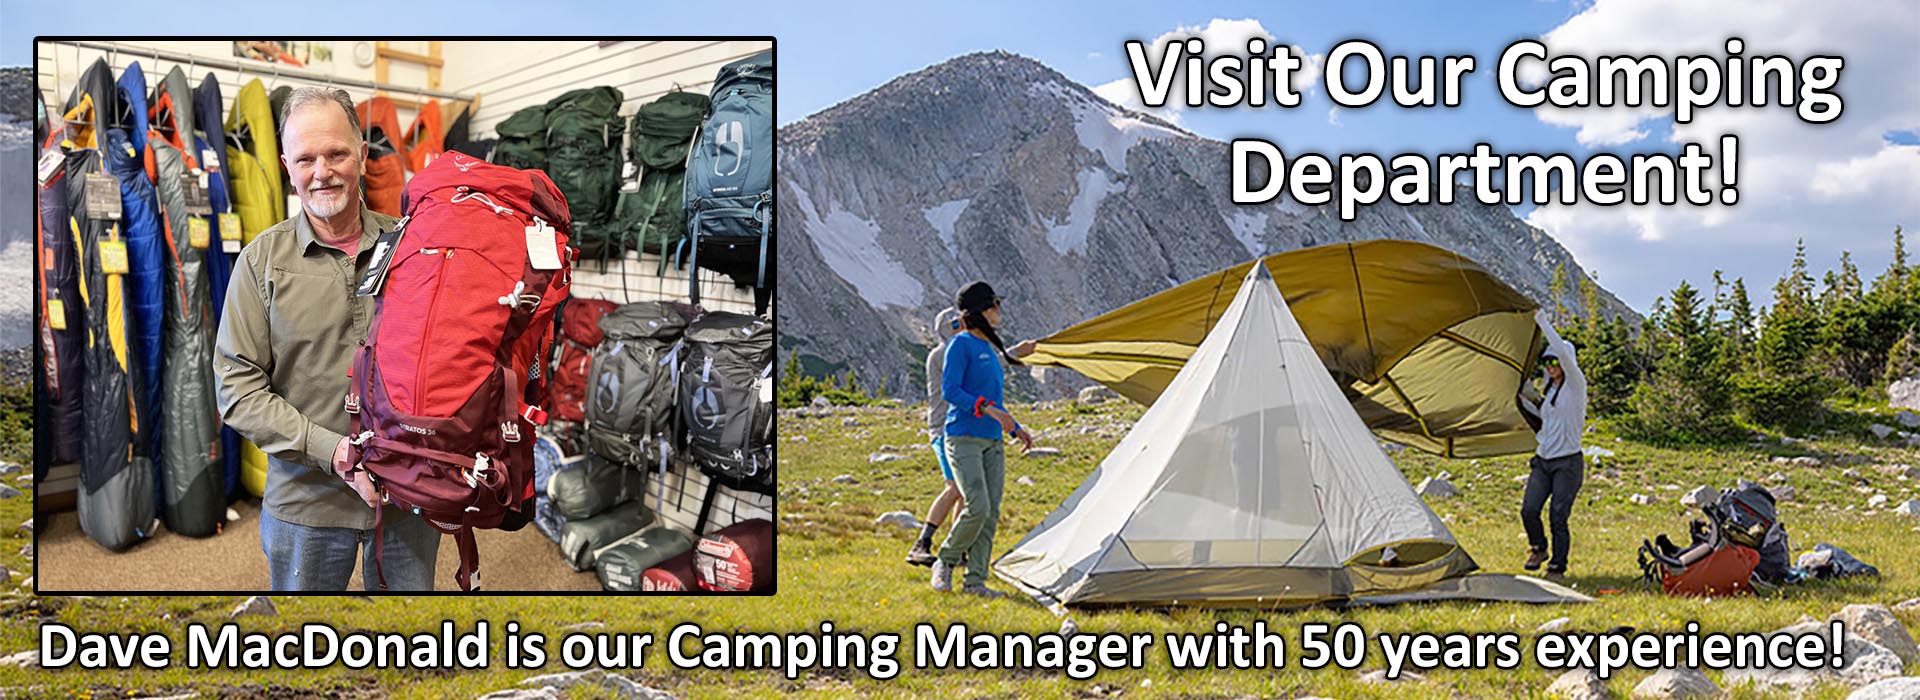 Visit our Camping Department! - Dave MacDonald is our Camping Manager with 50 years experience!